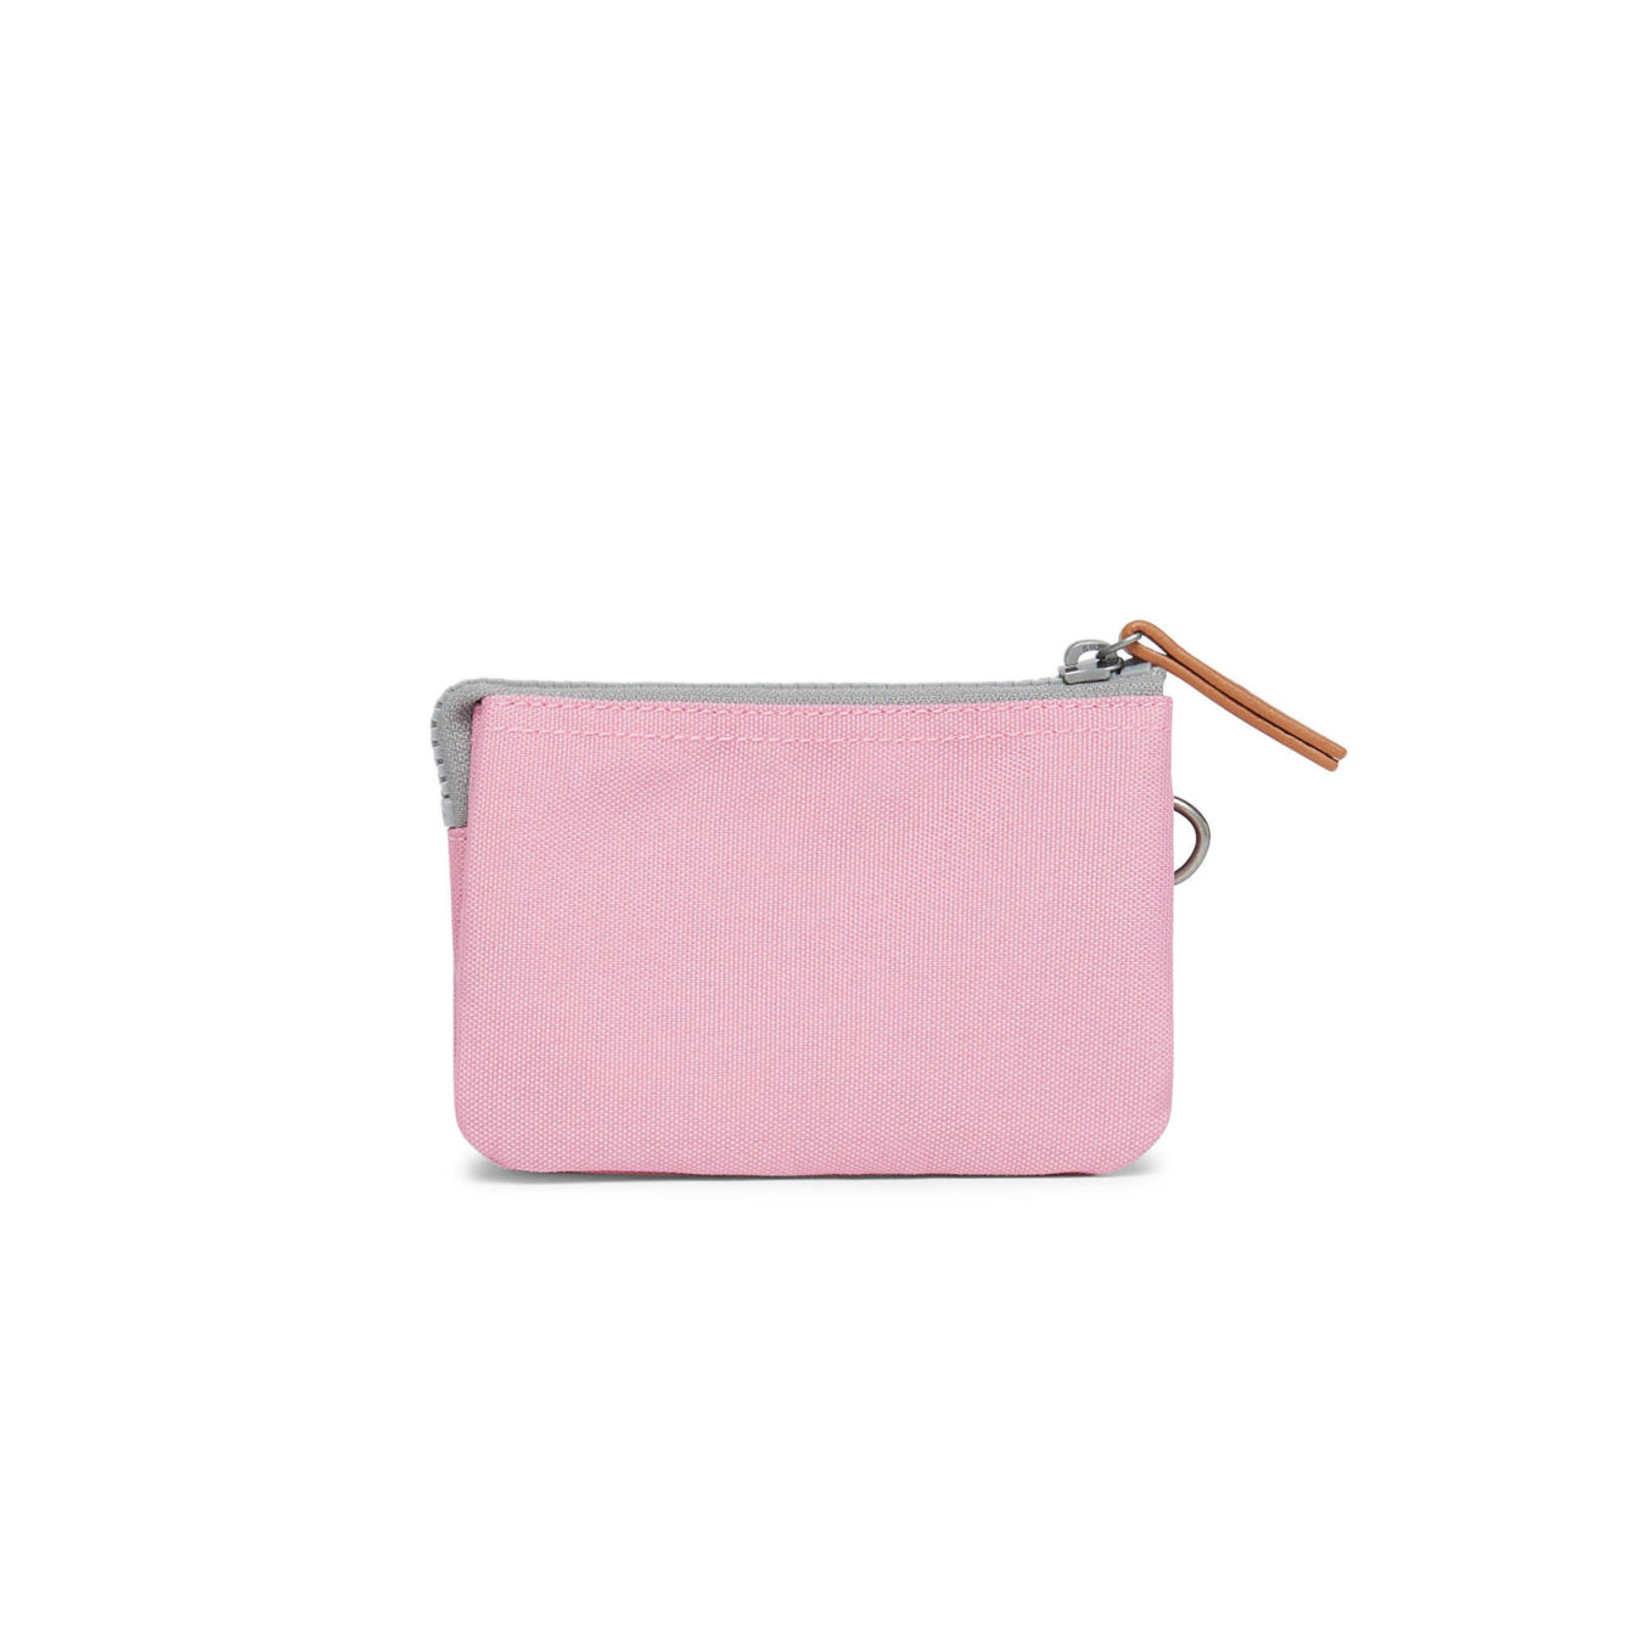 ROKA London Carnaby Wallet Sustainable Canvas Antique Pink